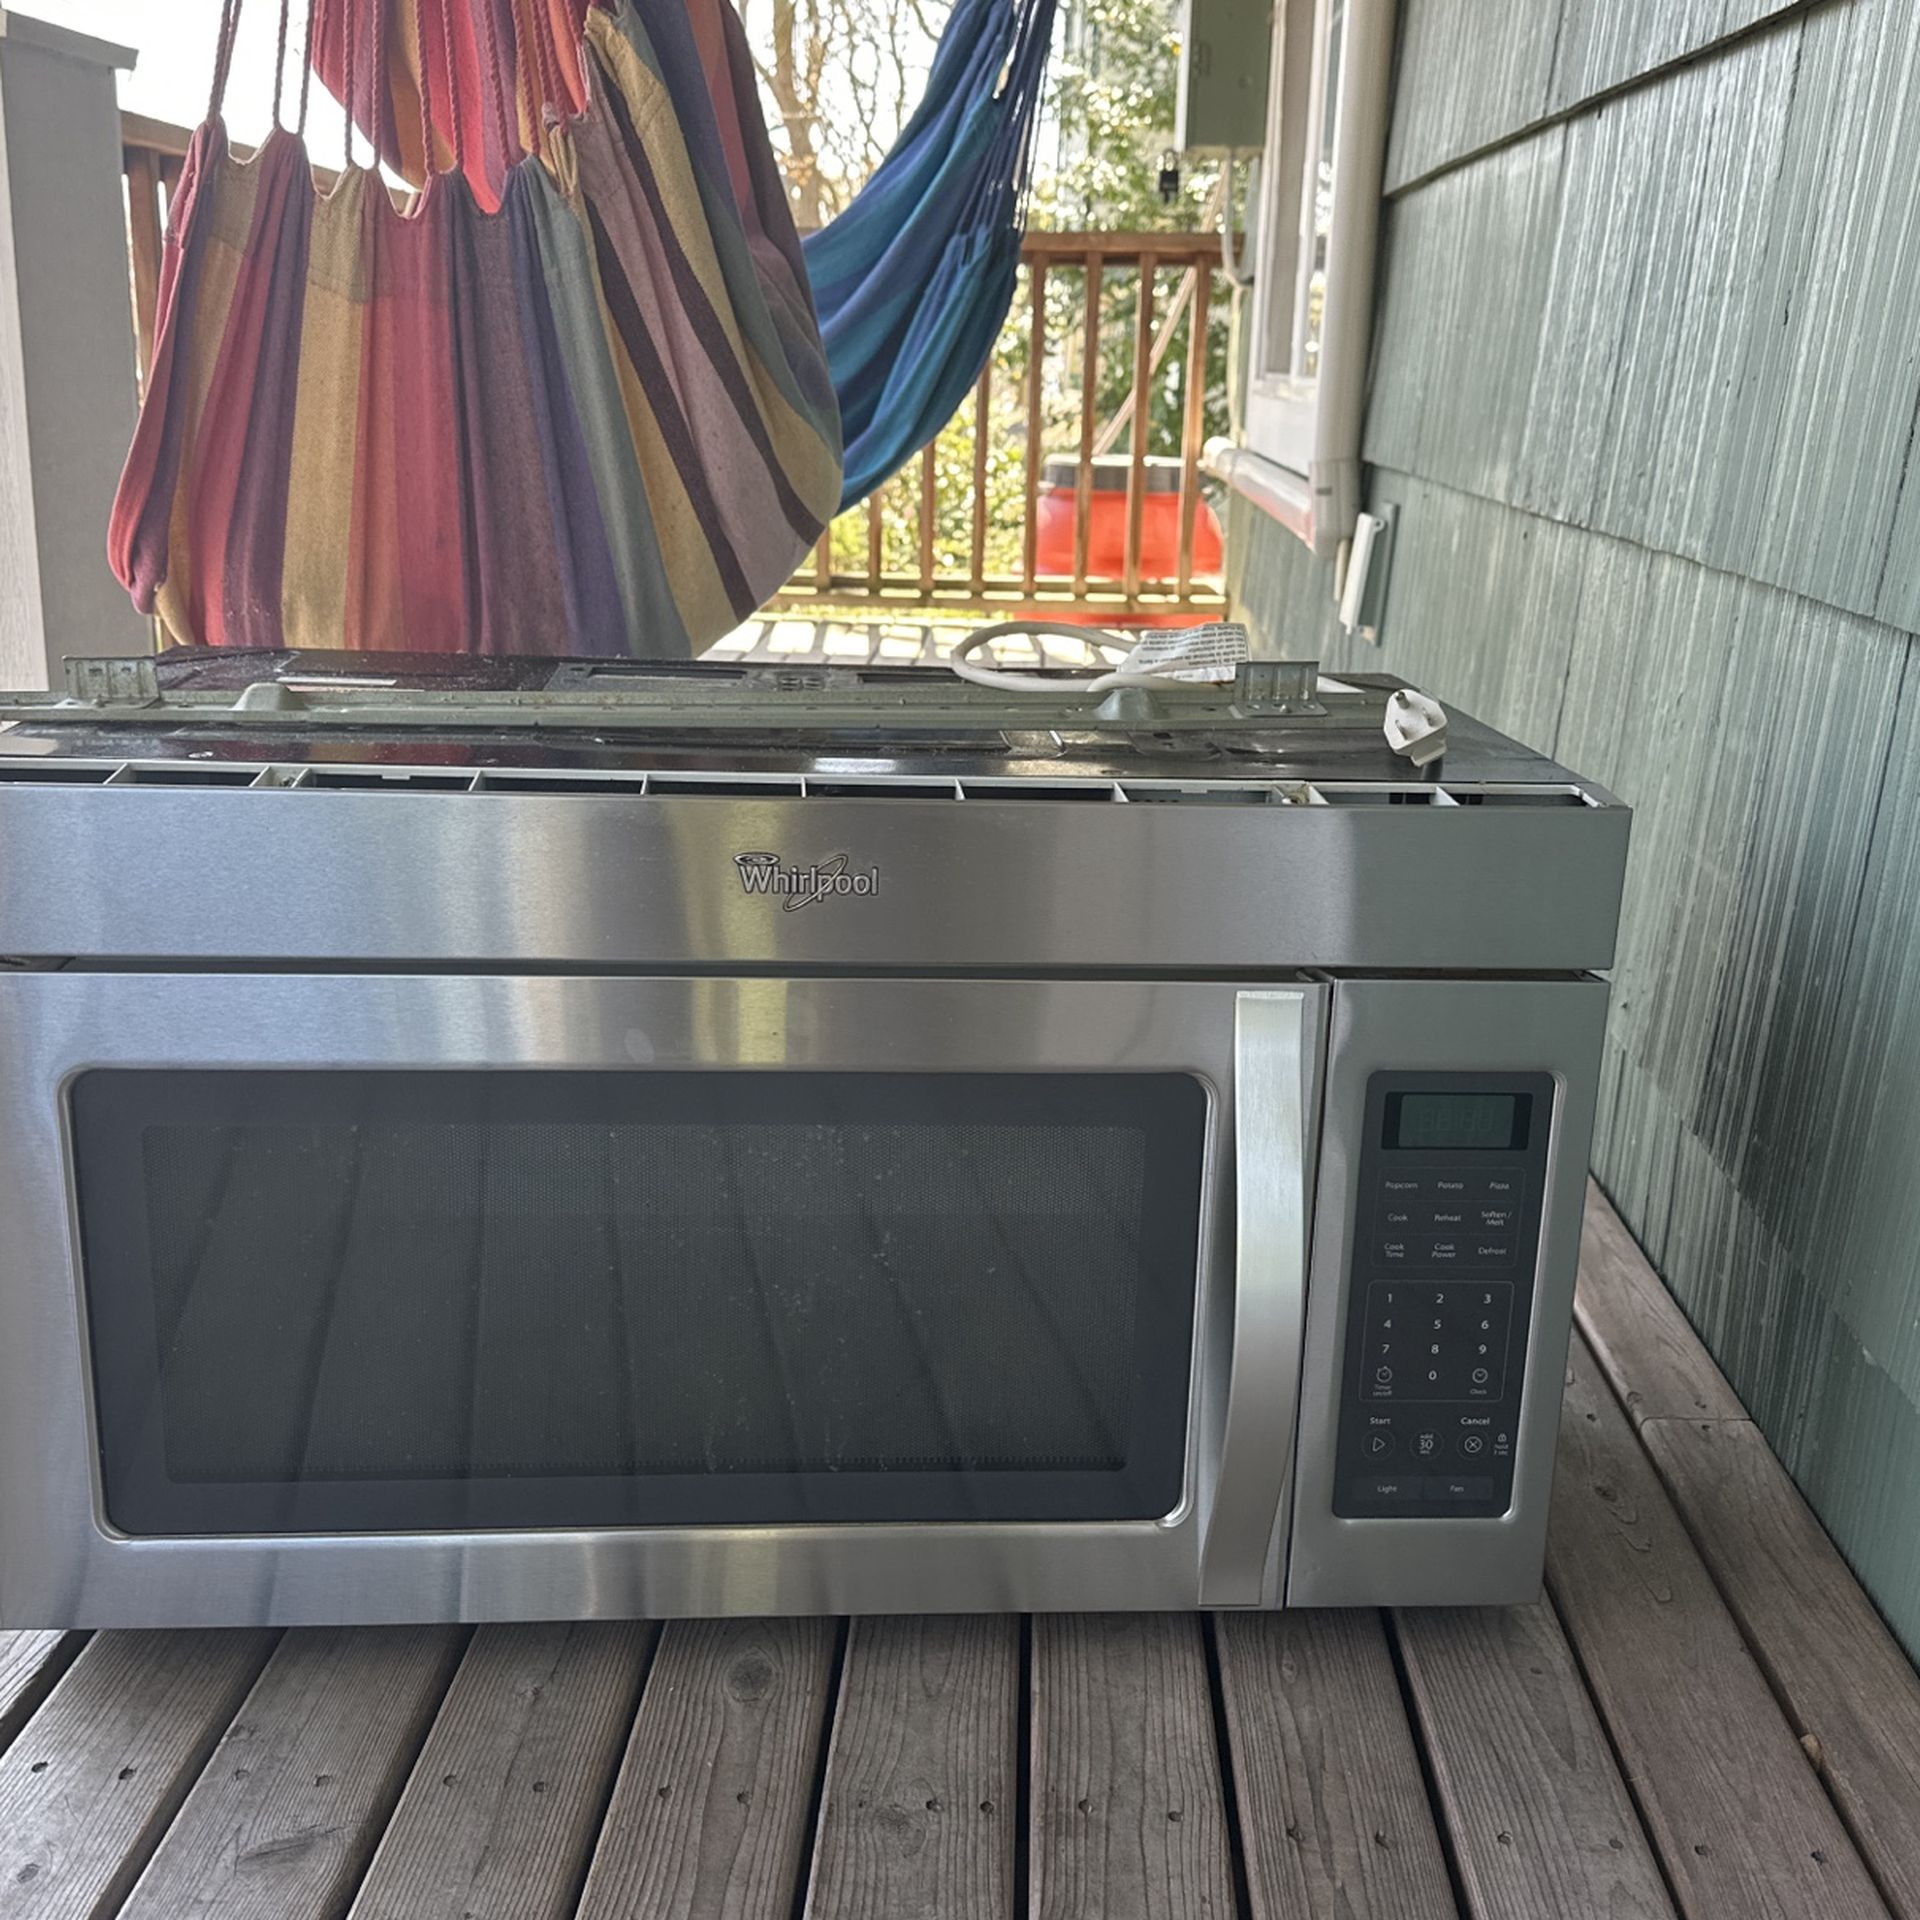 Free Whirlpool Over Range Microwave Must Pick Up In Oak Harbor Near Downtown